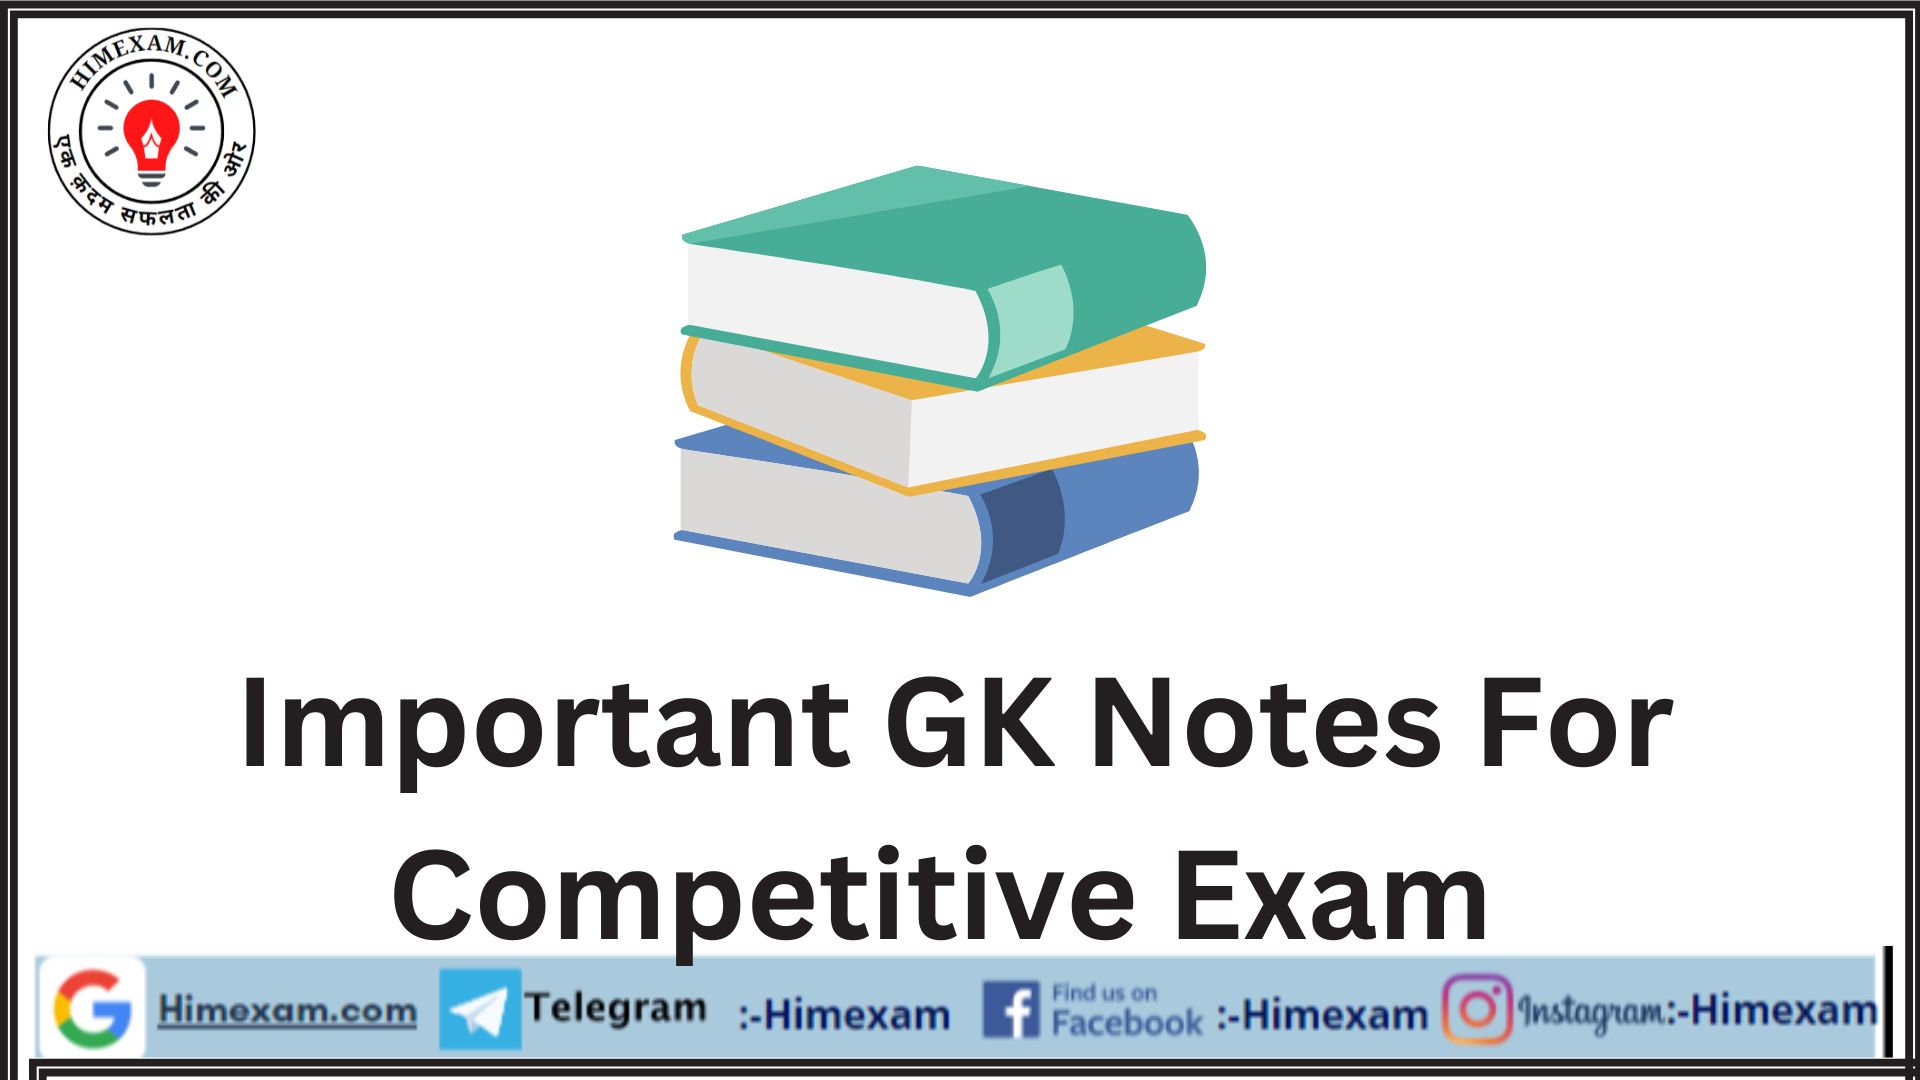 Important GK Notes For Competitive Exam